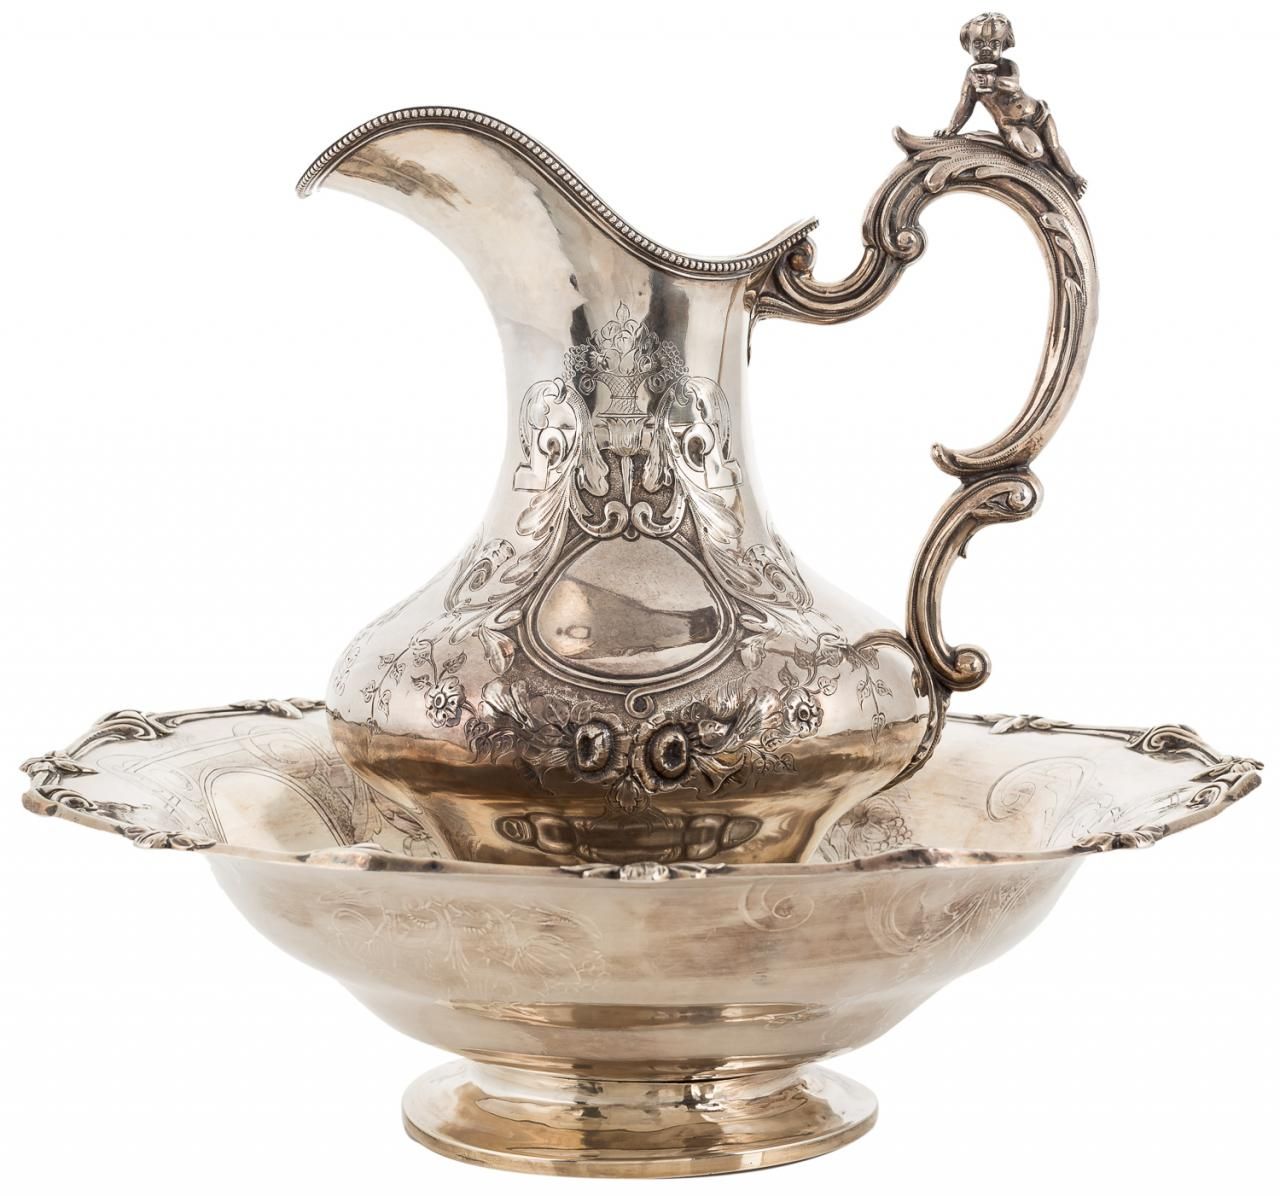 Null Set of ewer made of silver. Engraved and embossed decoration of plant motif&hellip;